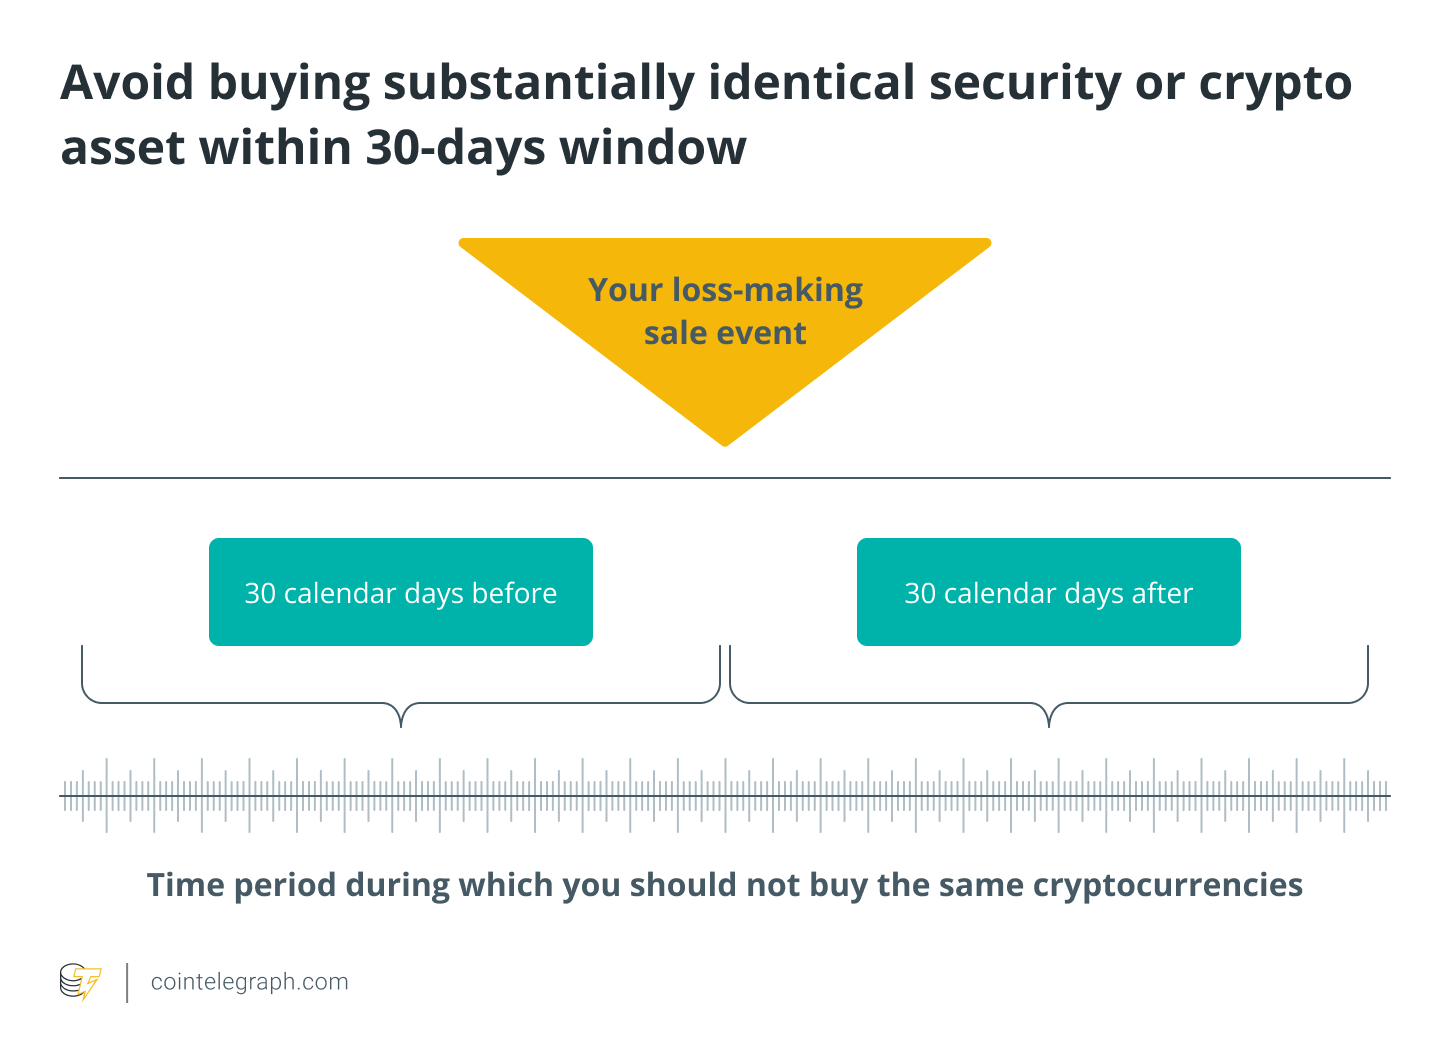 Avoid buying substantially identical security or crypto asset within 30-days window